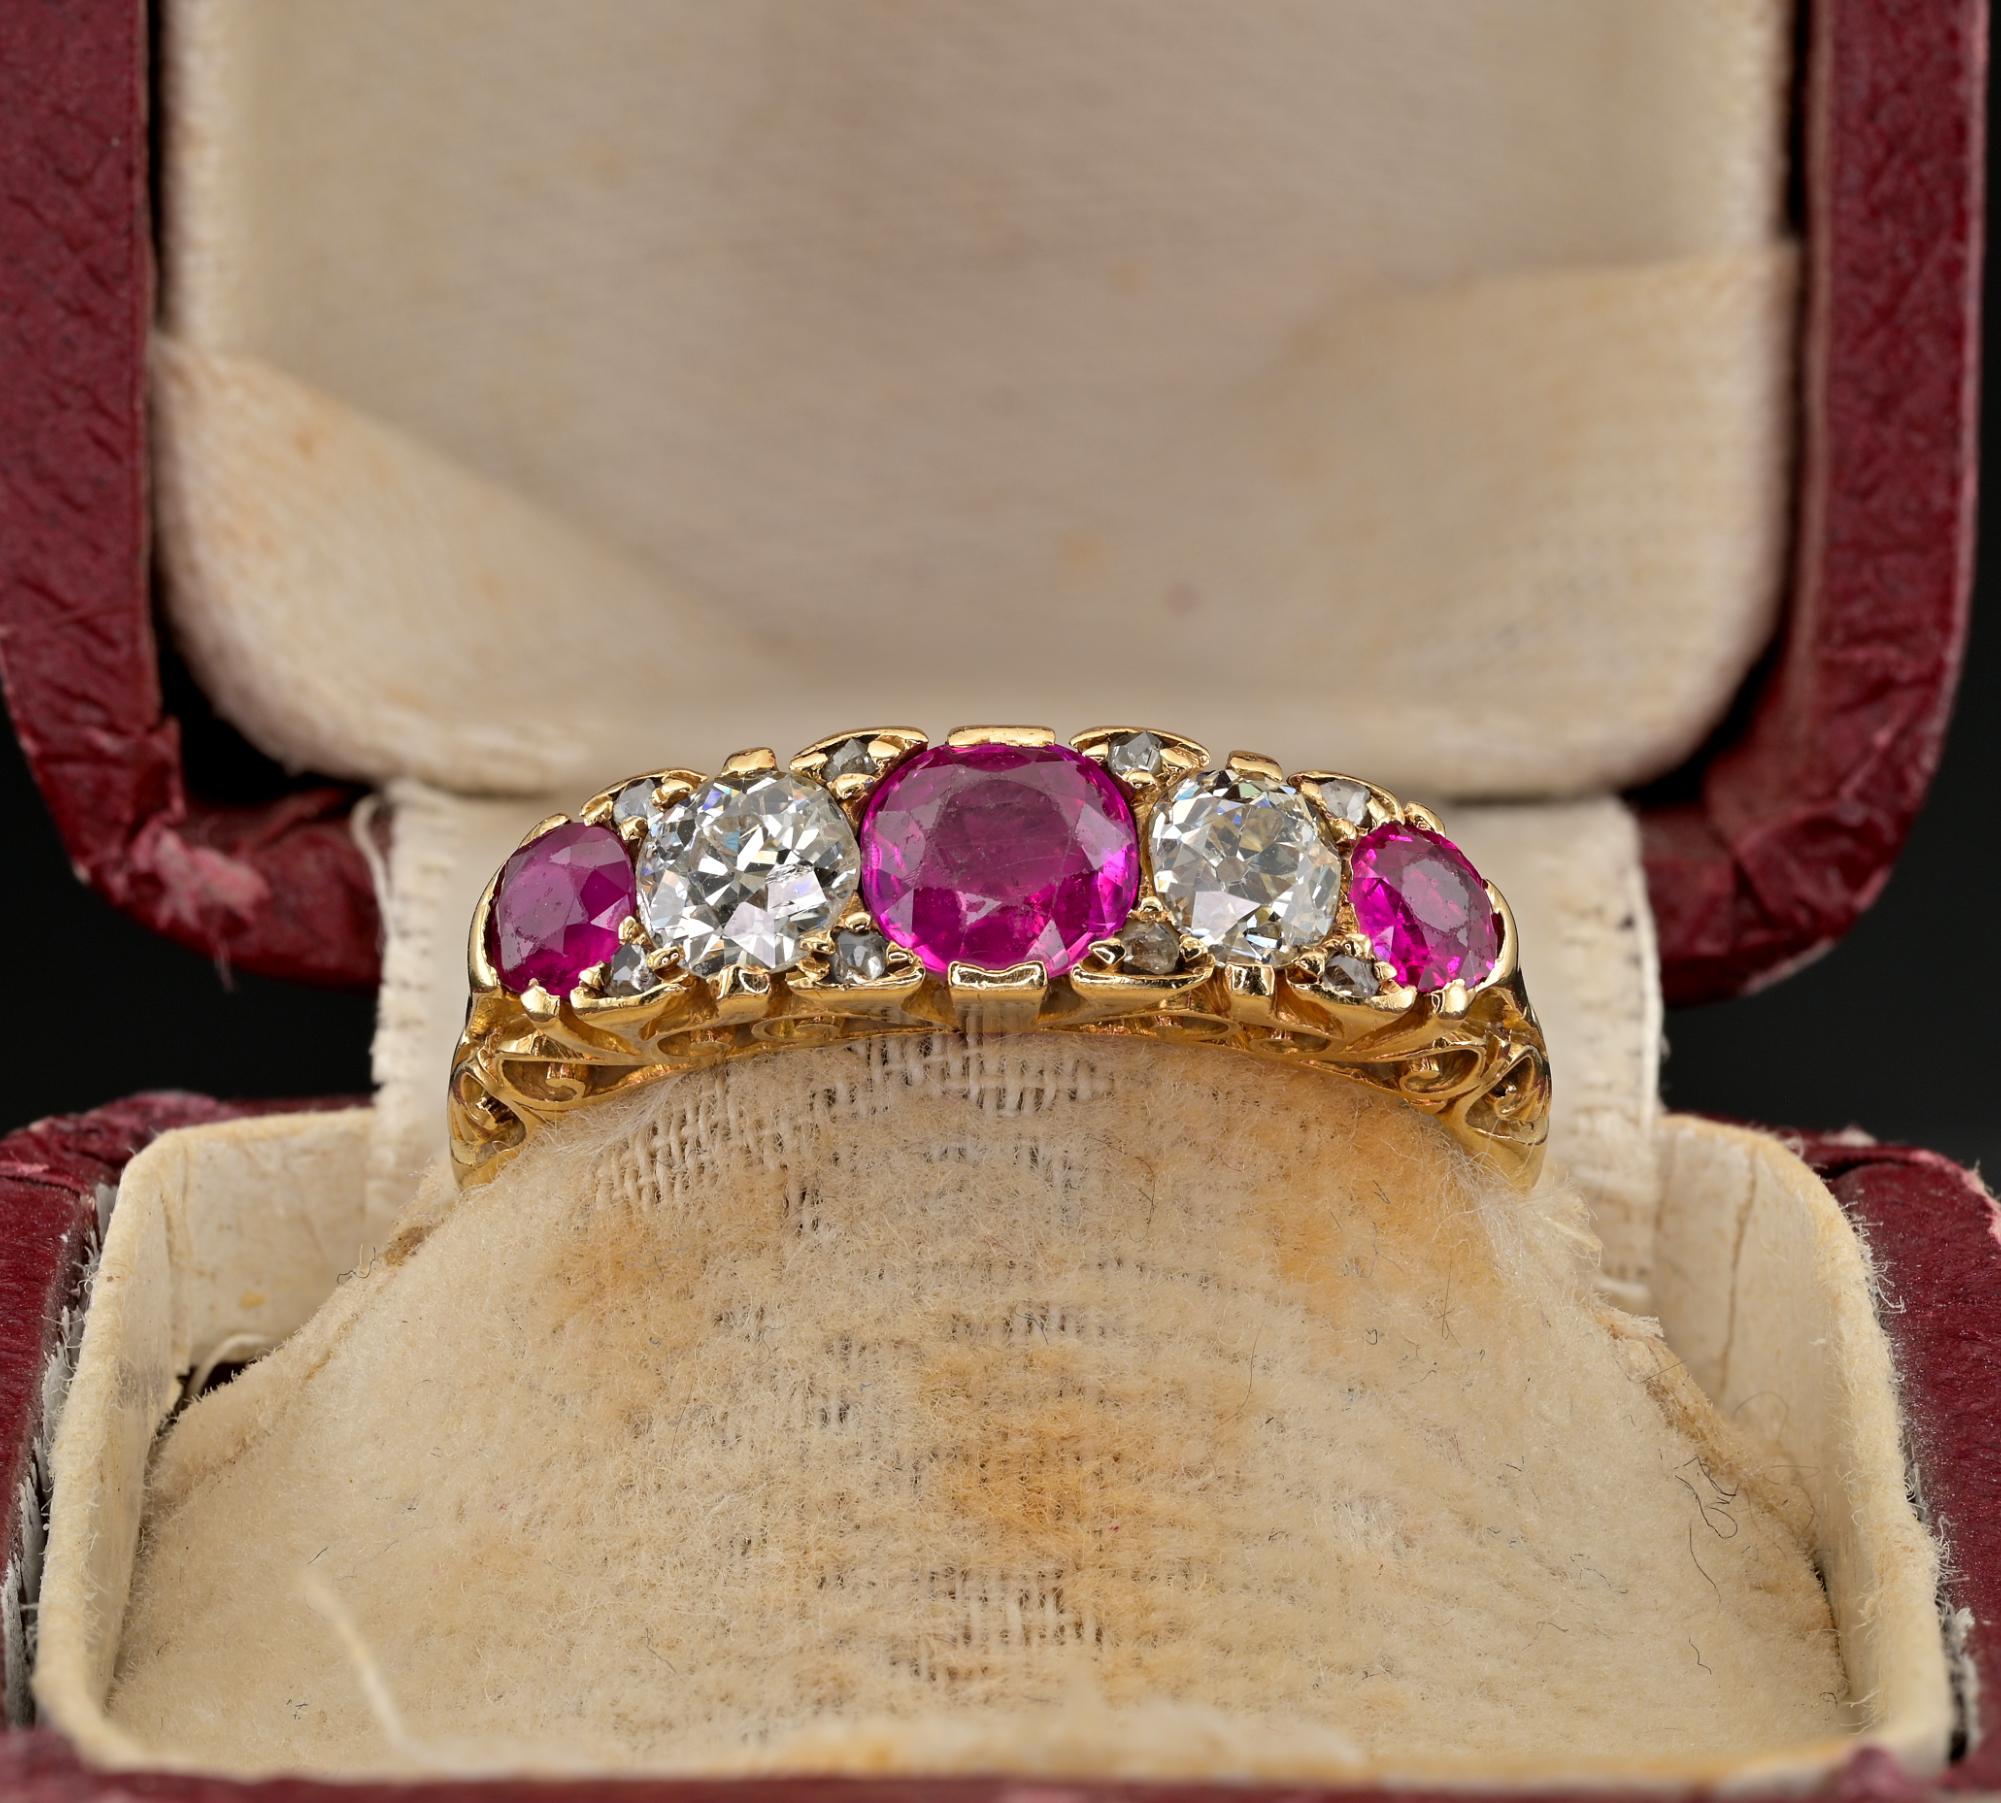 This very pretty antique Victorian period ring is 1890 ca.
English origin – bearing hallmarks
Traditional Victorian half hoop mount, beautiful  hand carved details exalting the fabulous Diamond & Ruby setting
Finely set with a composition of 3